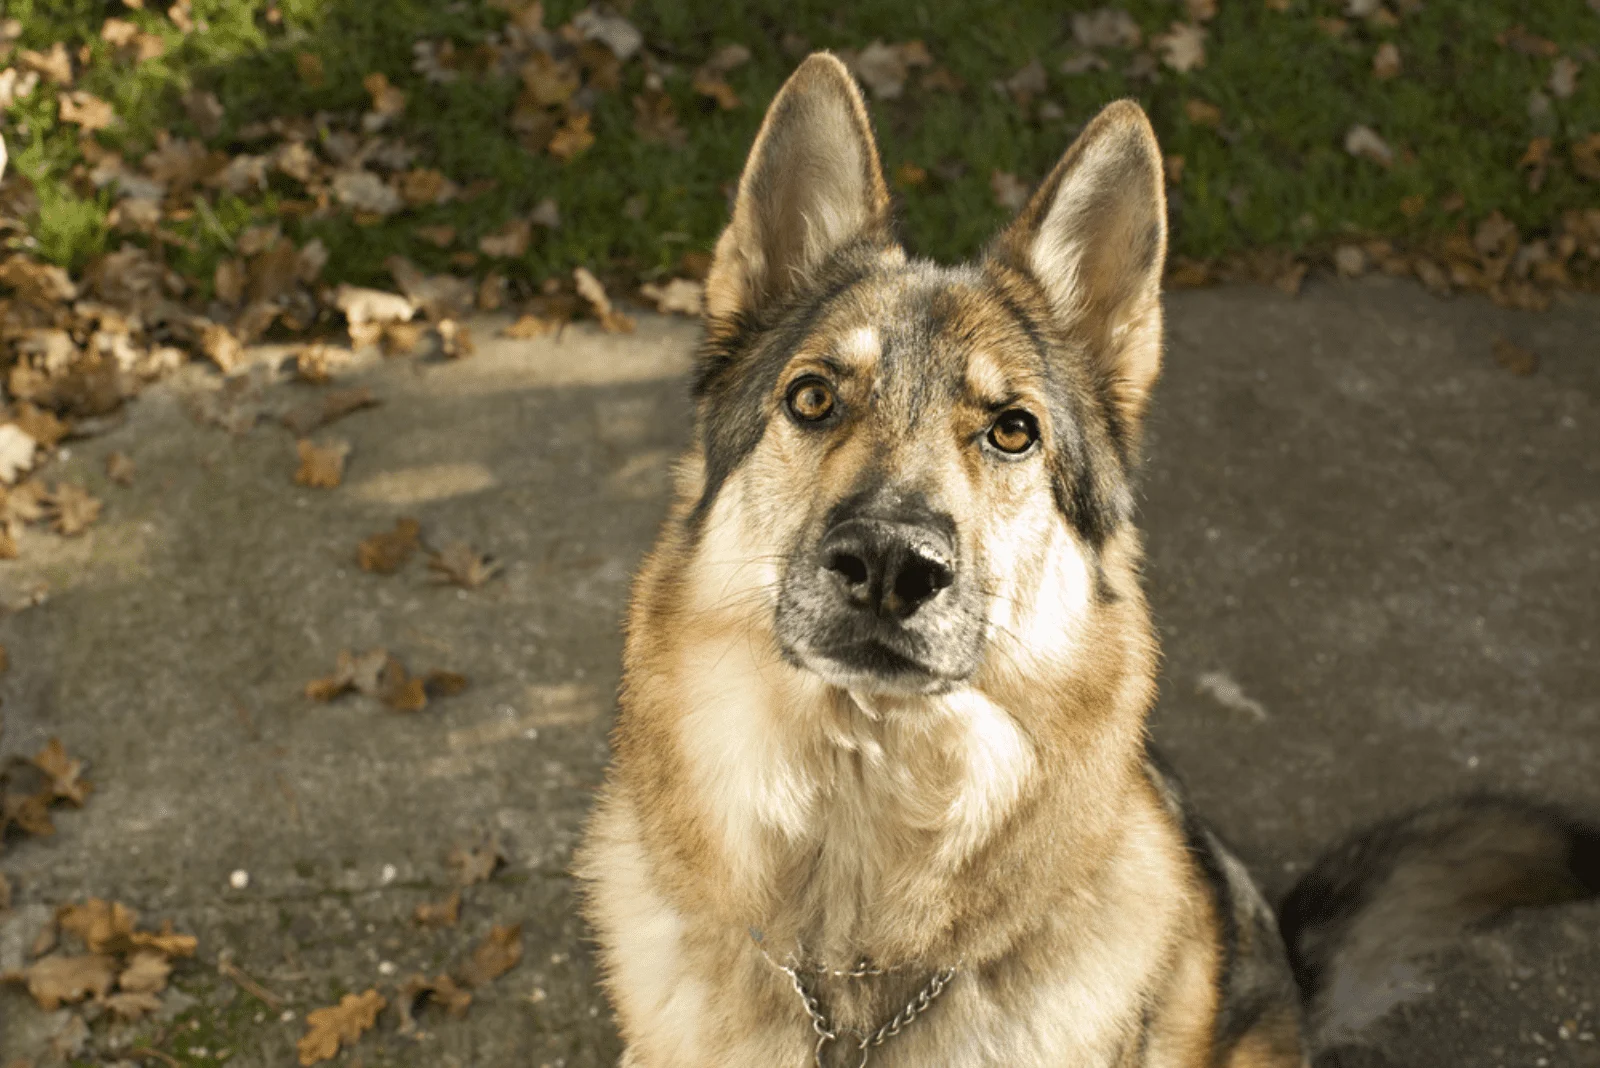 Sable German Shepherd sits sadly and looks at the camera